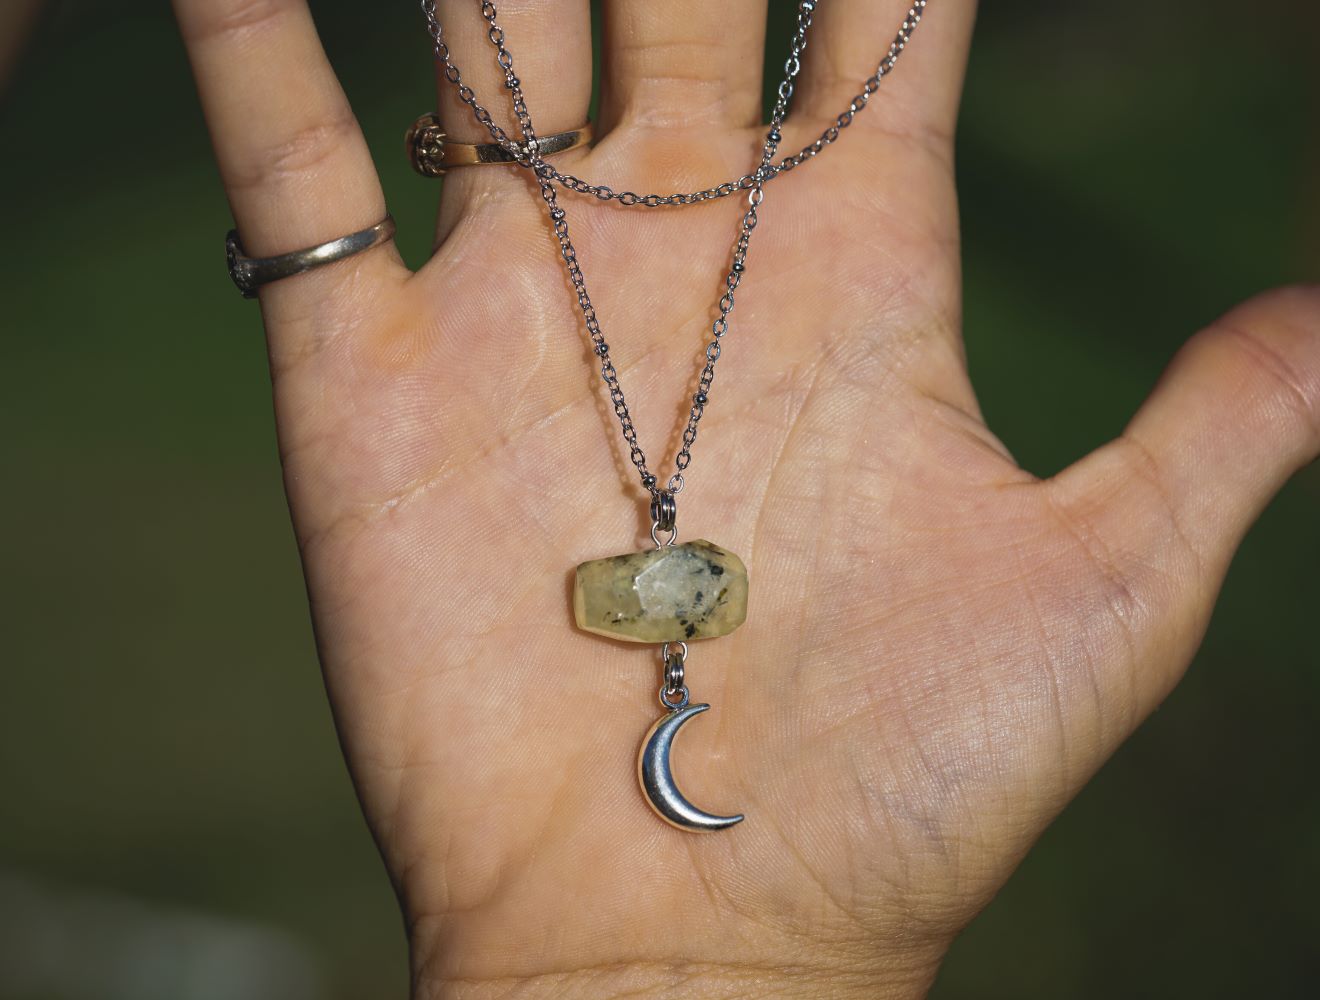 This gorgeous Prehnite stone is about .45" long, suspended from 18" and 20" long stainless steel chains with a 2" extension. In addition, I infuse each of my handcrafted crystal designs with Reiki energy and charge and clear them with sunlight, moonlight, and sage, which amplifies not only the stones but your intentions as well. This necklace came to be for a specific person and situation, there are no coincidences, so if you stumbled across this page, maybe it was meant for you:)